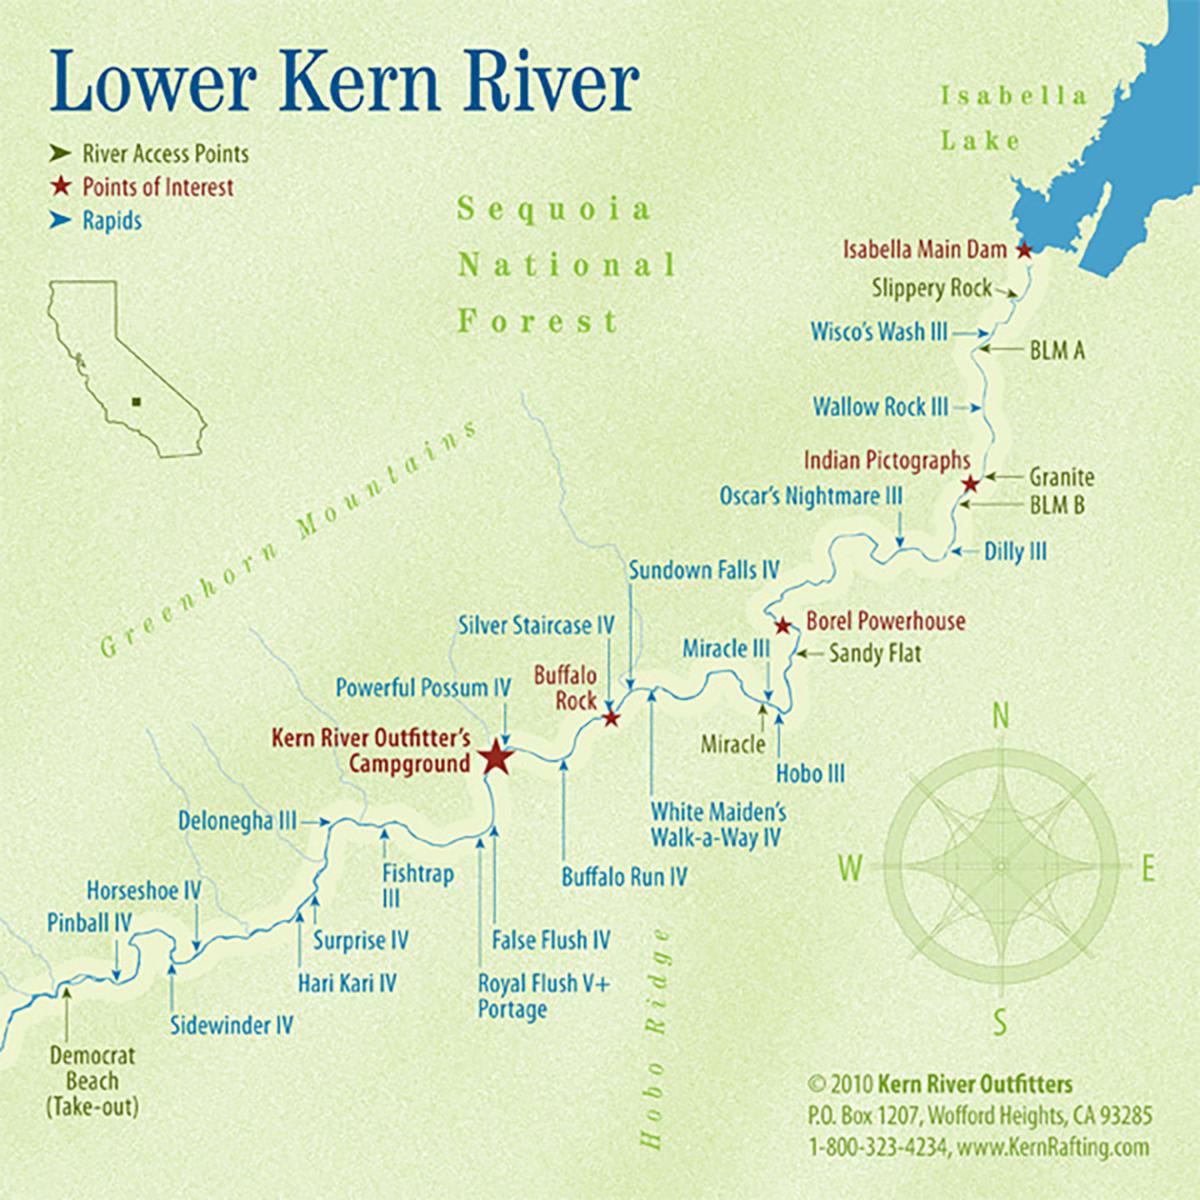 Despite perceptions of a poor water year, lower Kern River still